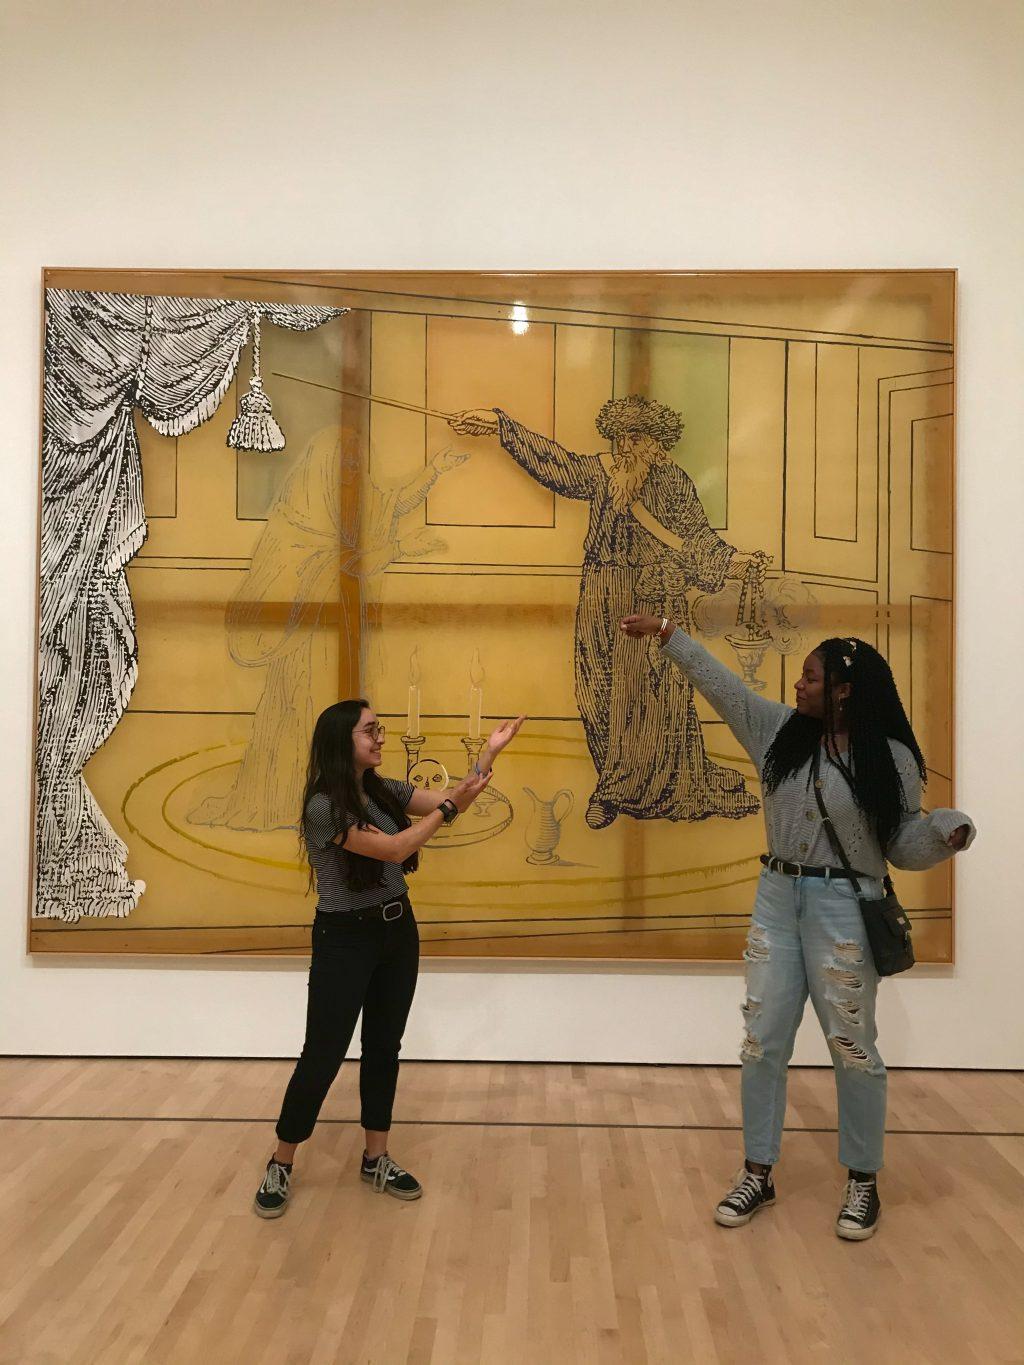 Djobaih (right) and her best friend imitate a piece of art during a field trip at the San Francisco Museum of Modern Art in February. Djobaih said she chose to attend Pepperdine because of the Christian community and beautiful campus.